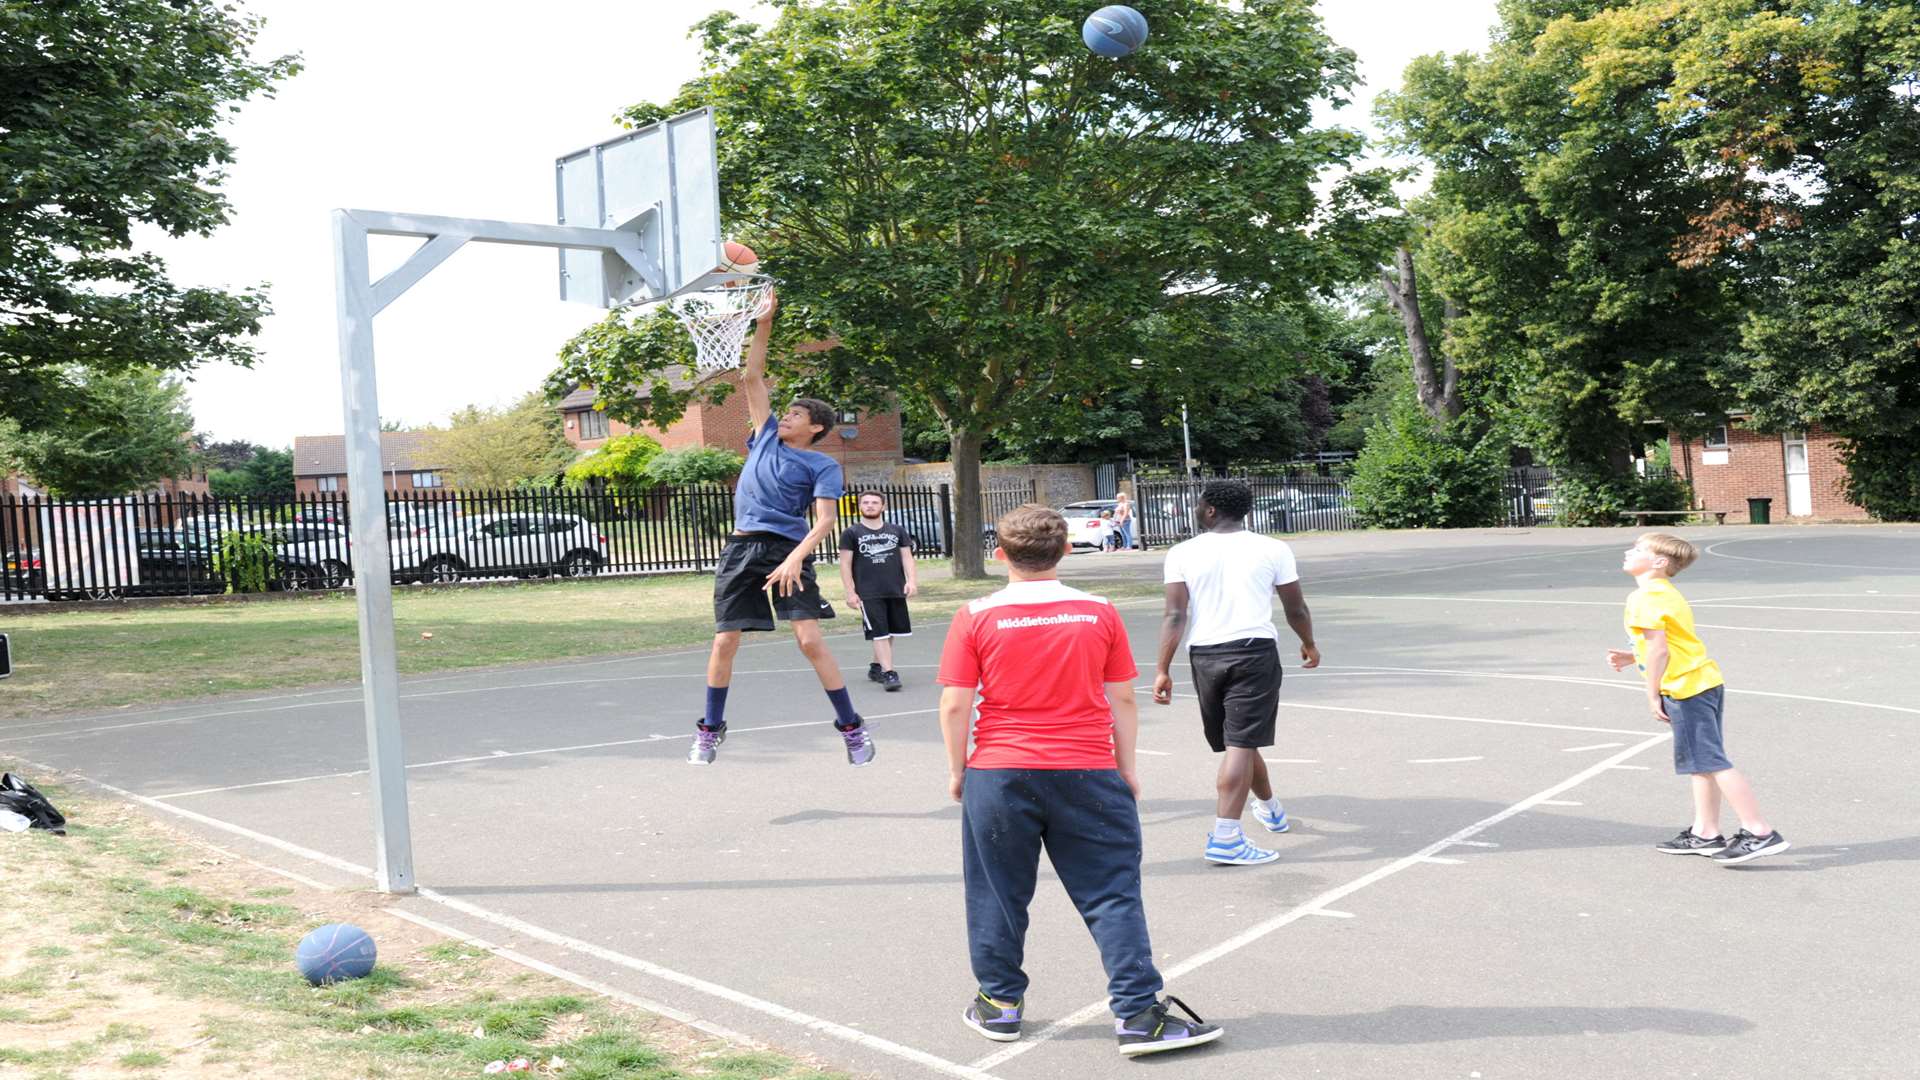 A group of boys enjoy playing basketball on the courts at Woodlands Park, Gravesend